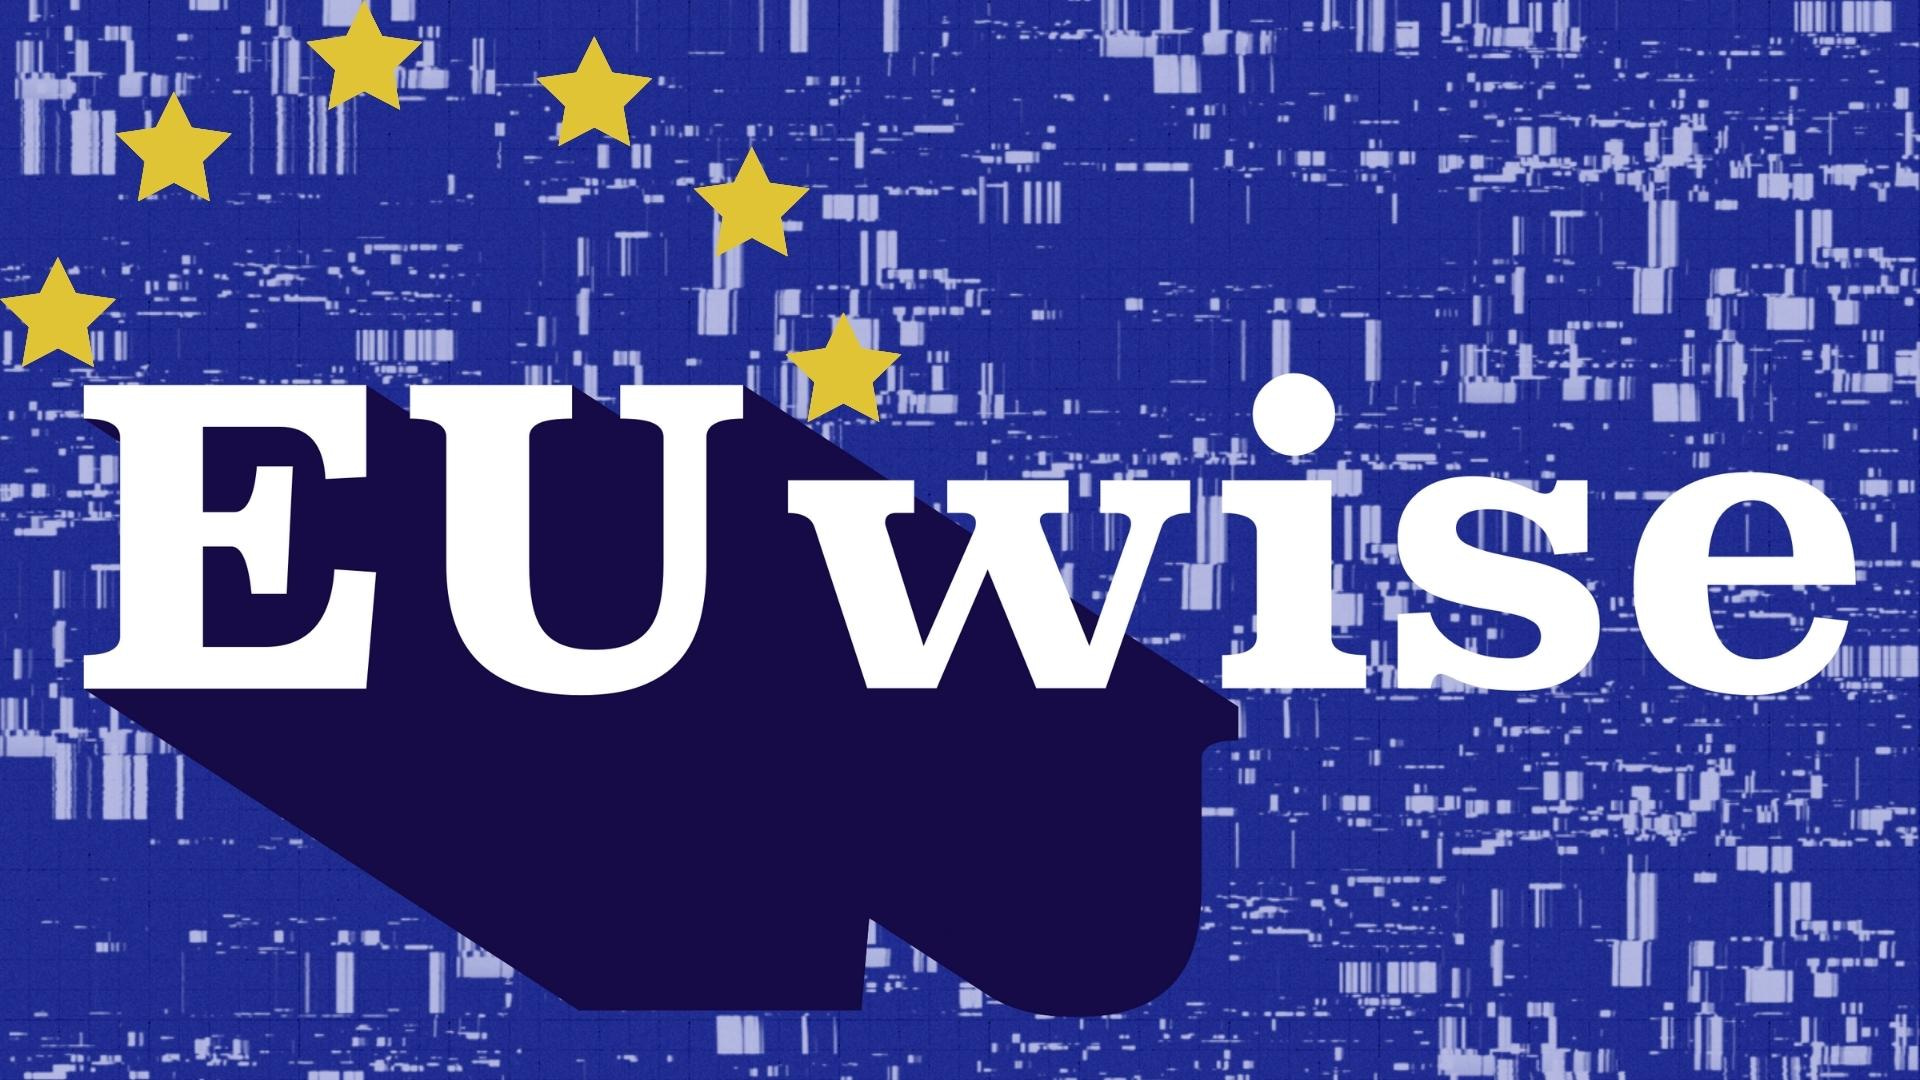 euwise